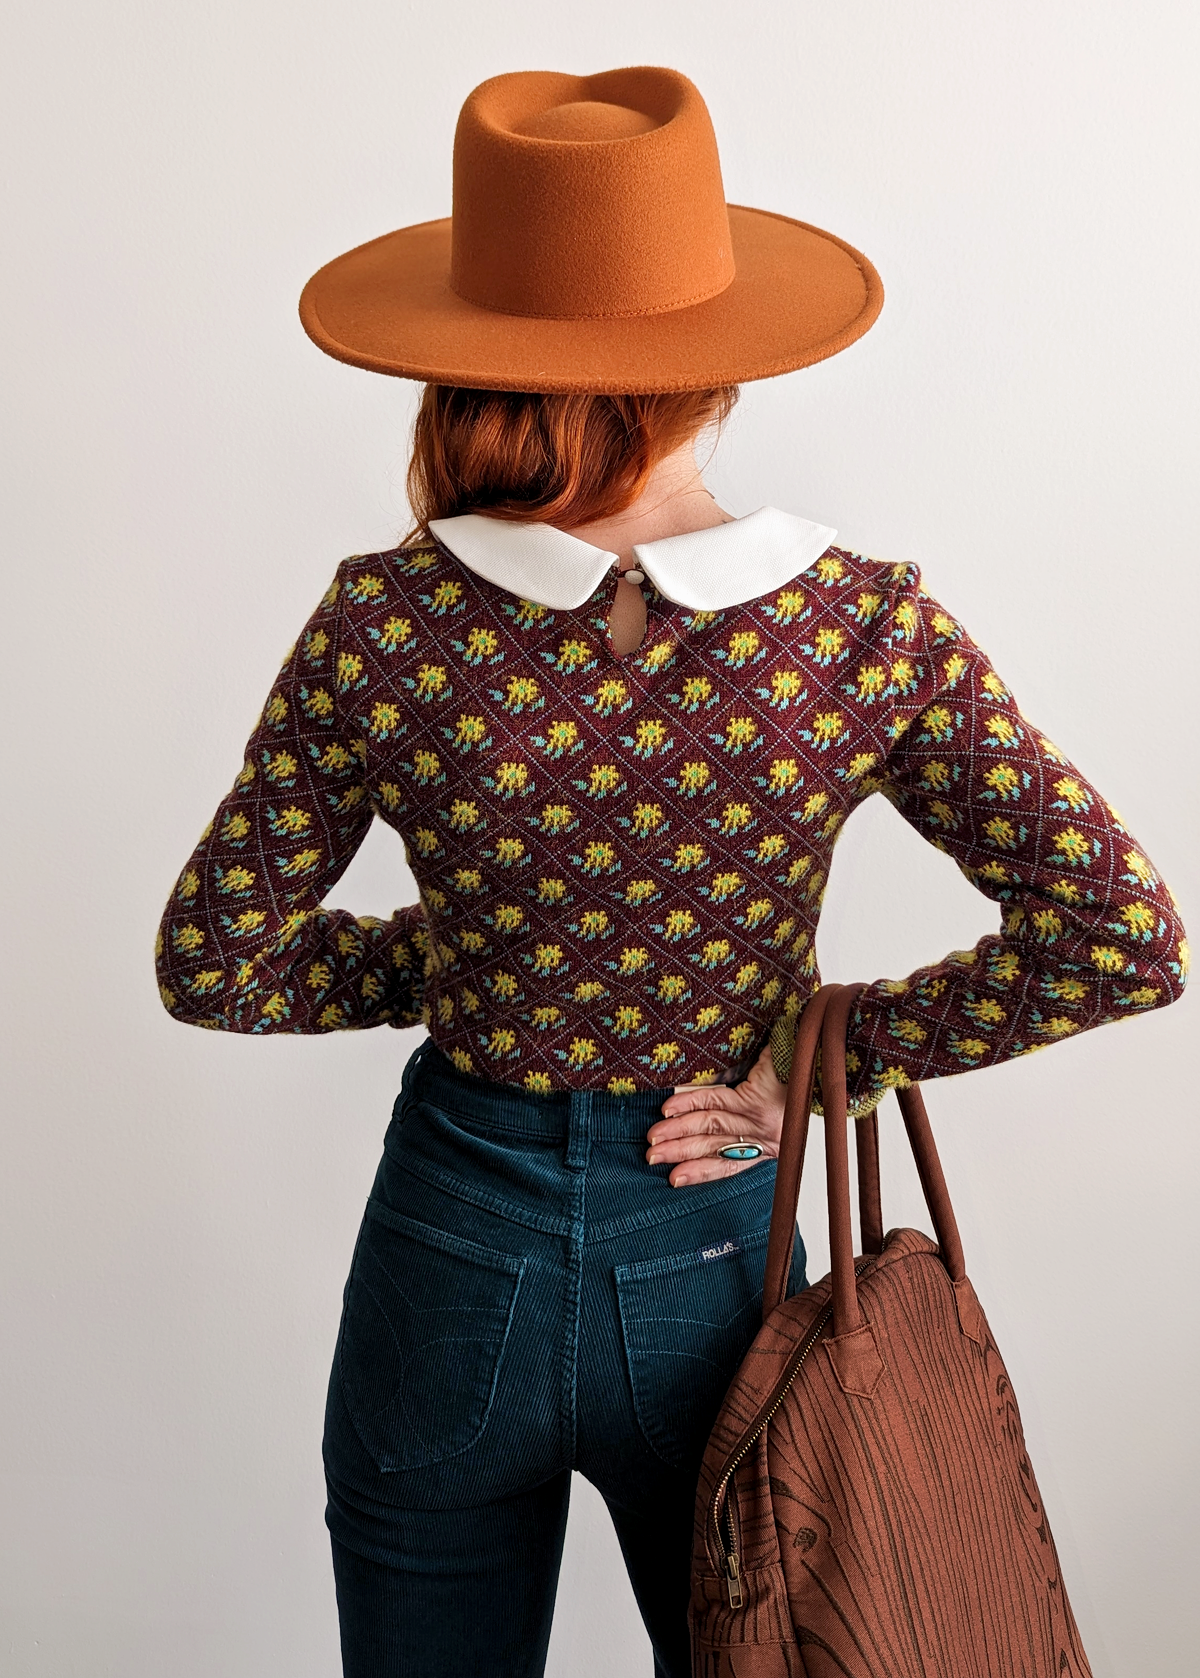 60s inspired Dolly Peter Pan Collar Burgundy Floral Knit Long Sleeve Crop Top by Glamorous UK